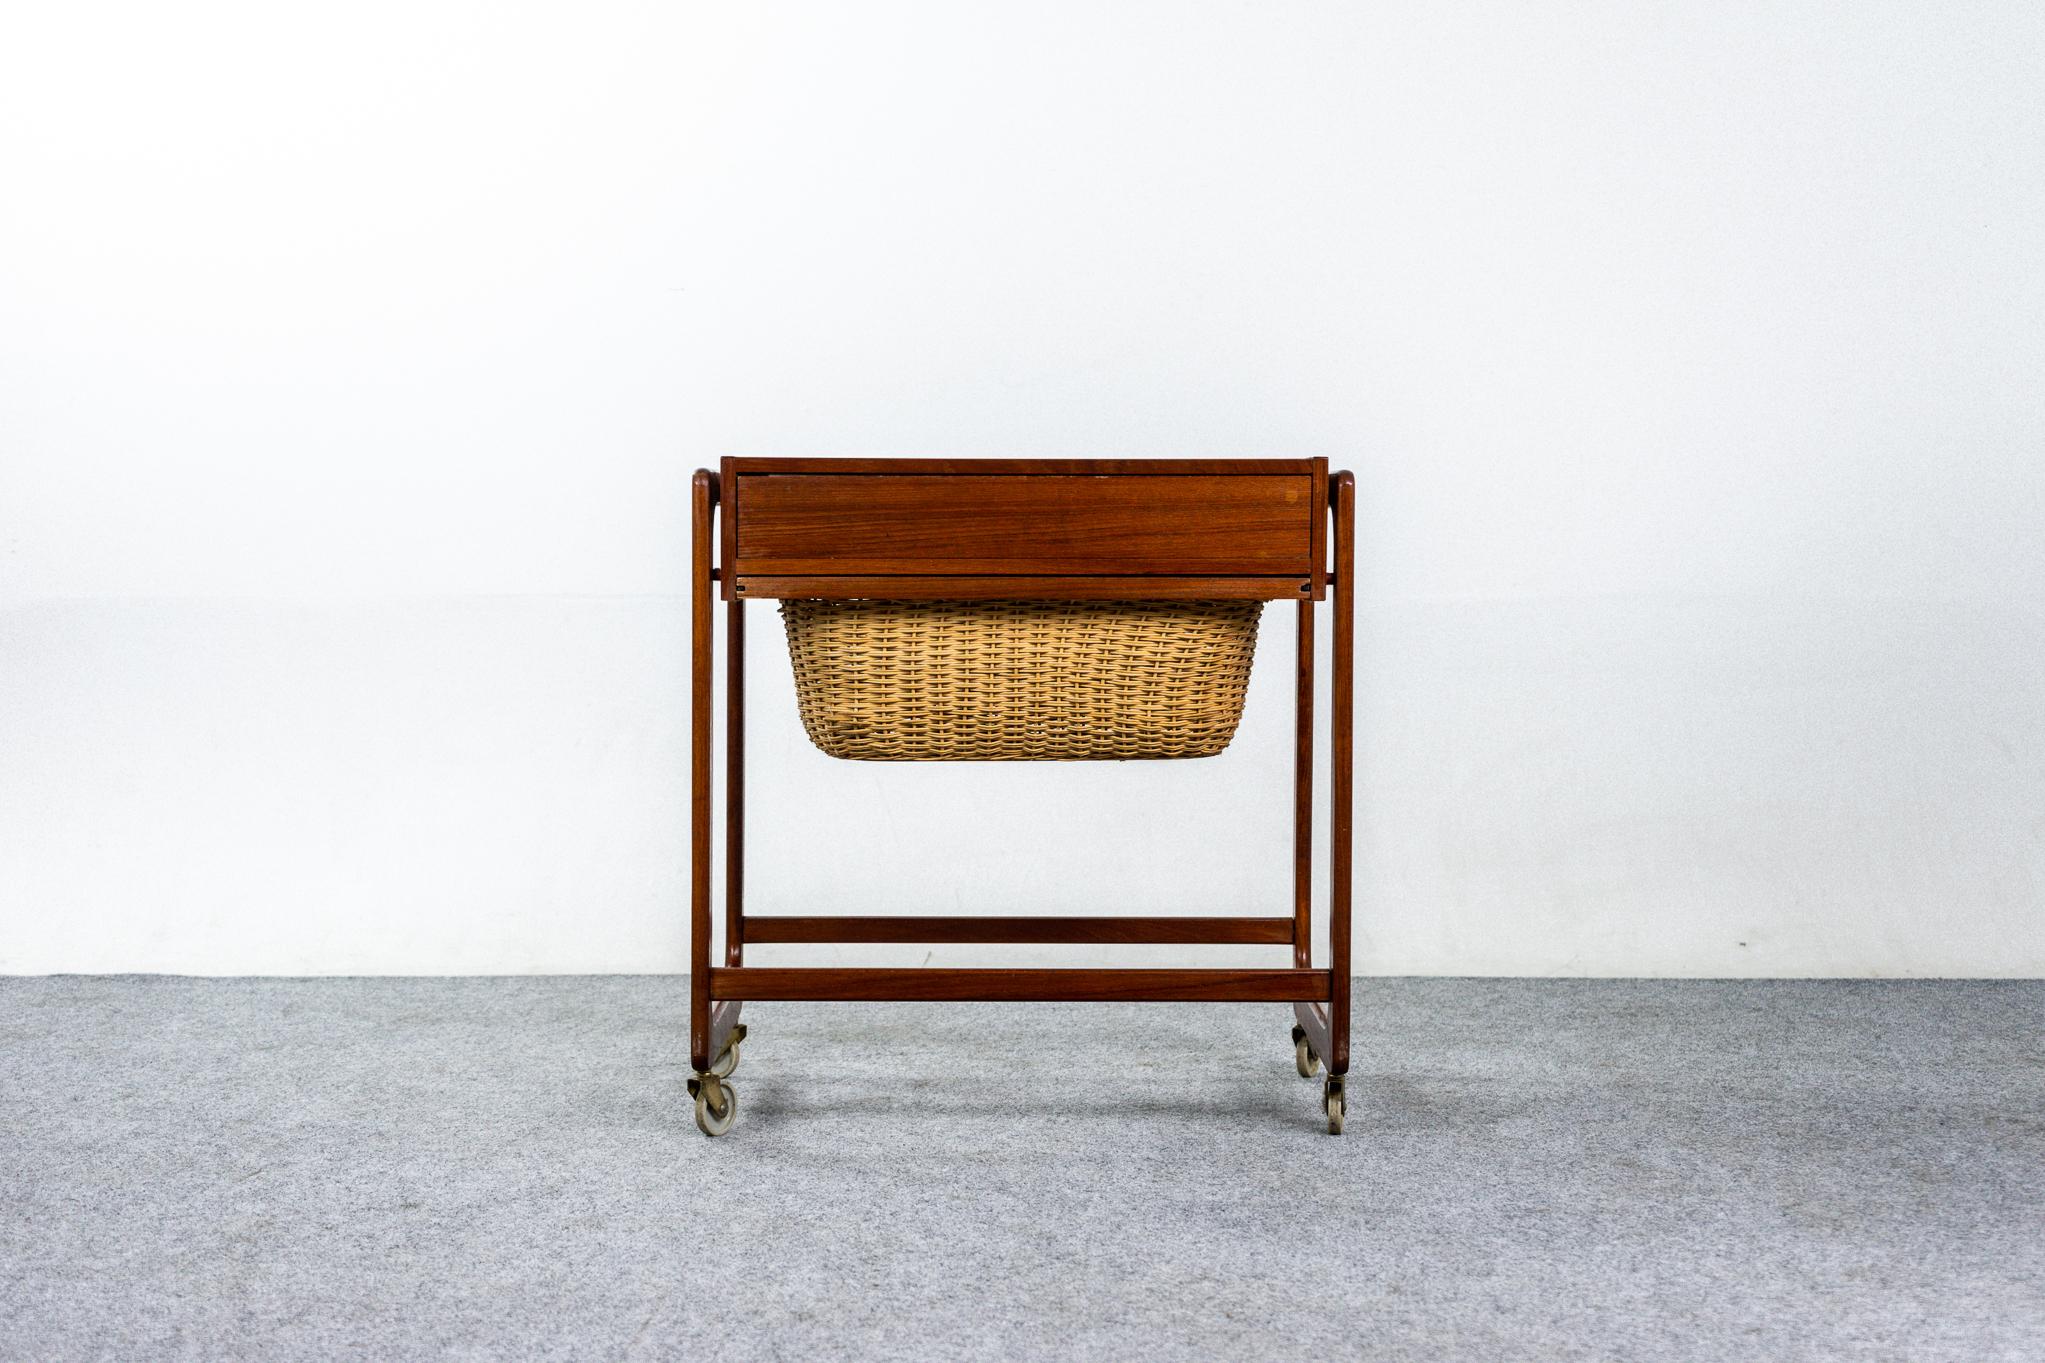 Teak Scandinavian sewing table with basket, circa 1960's. Delightful sewing table features original basket and fitted interior drawer, get organized! Original casters, smooth operating. Compact size works well as a side table or as a unique bedside